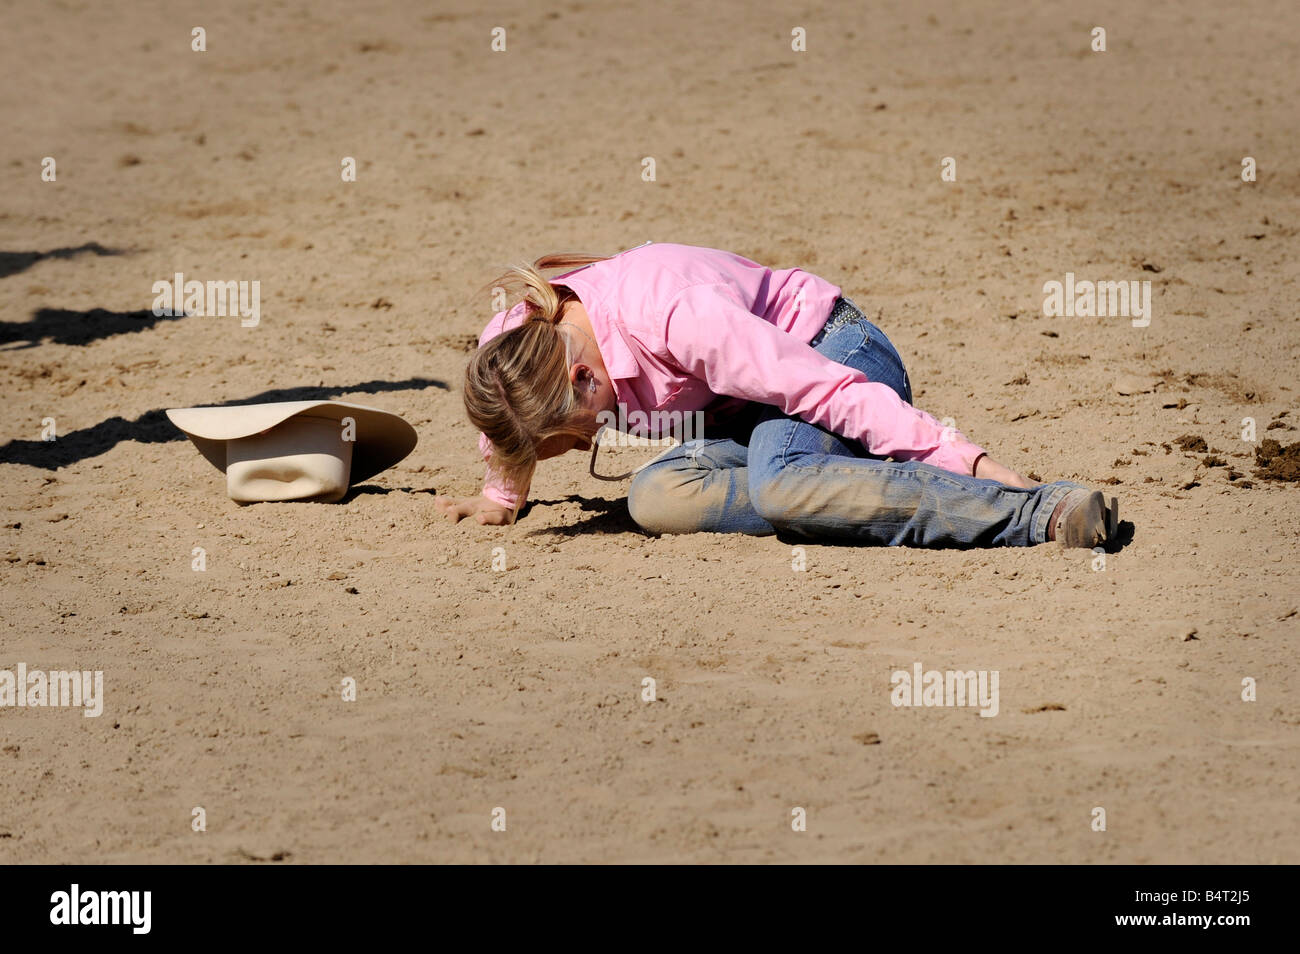 Rodeo female receives medical attention after falling off horse Stock Photo